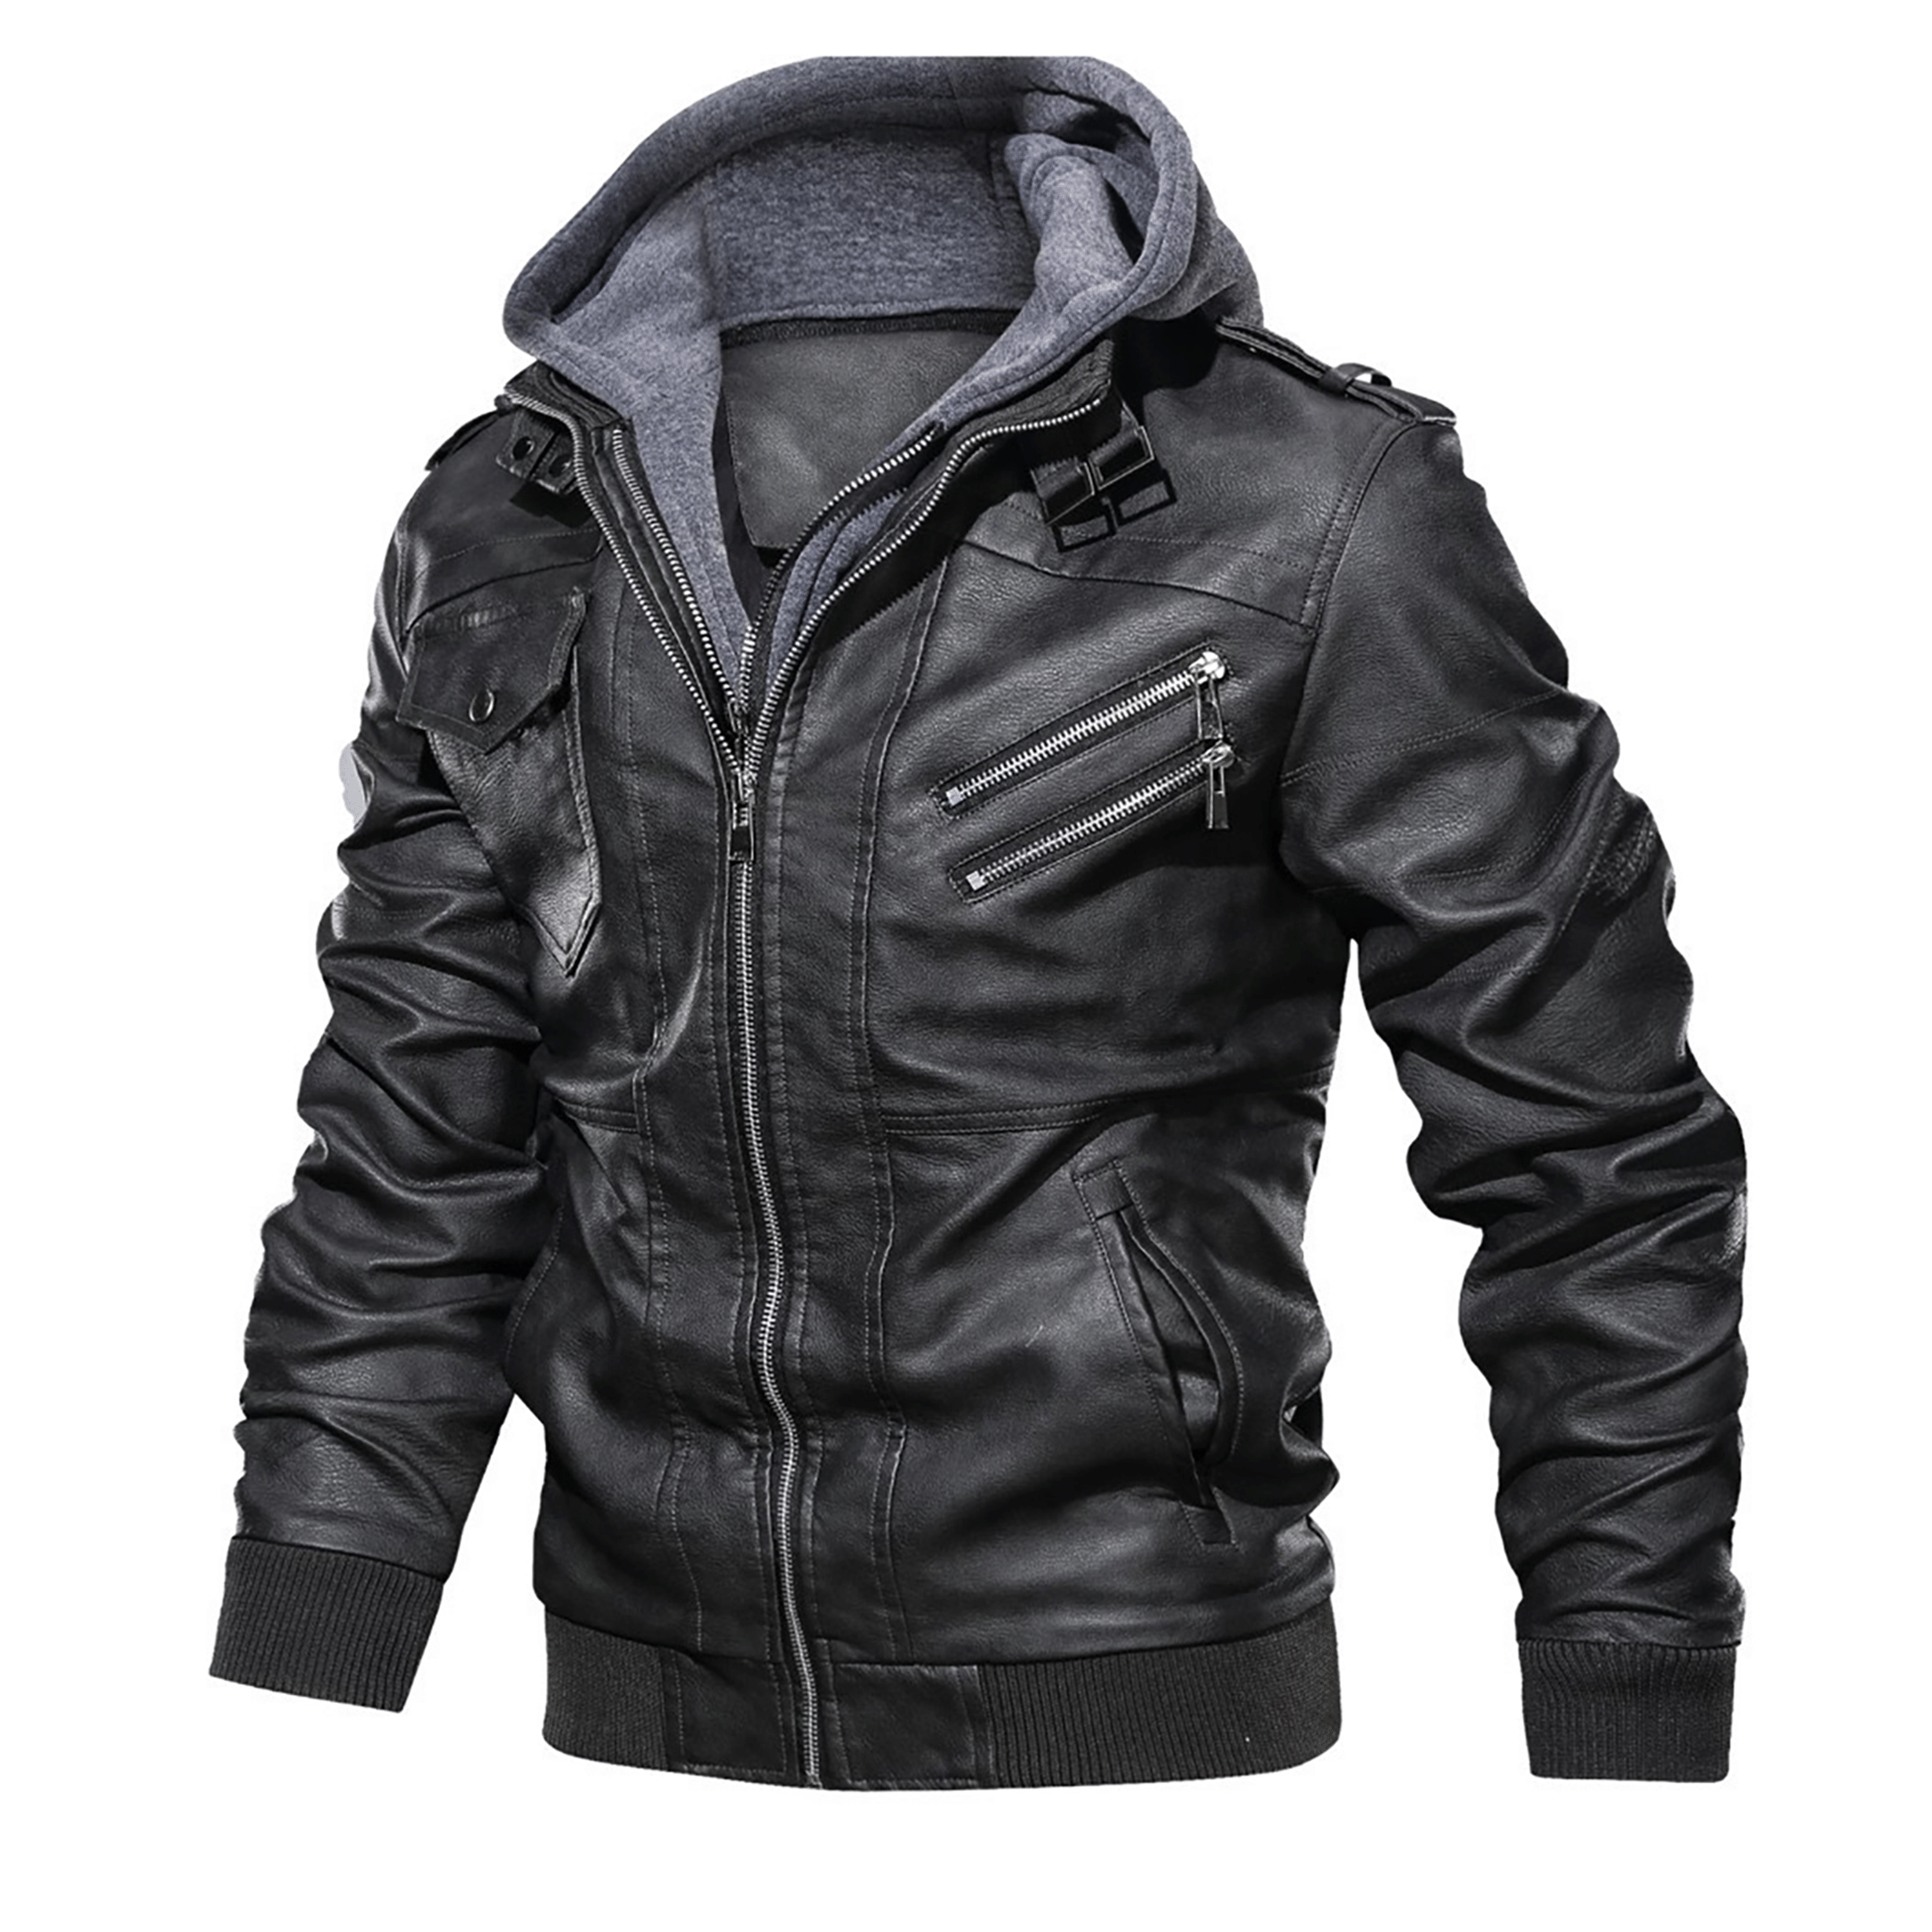 Top leather jackets and latest products 311